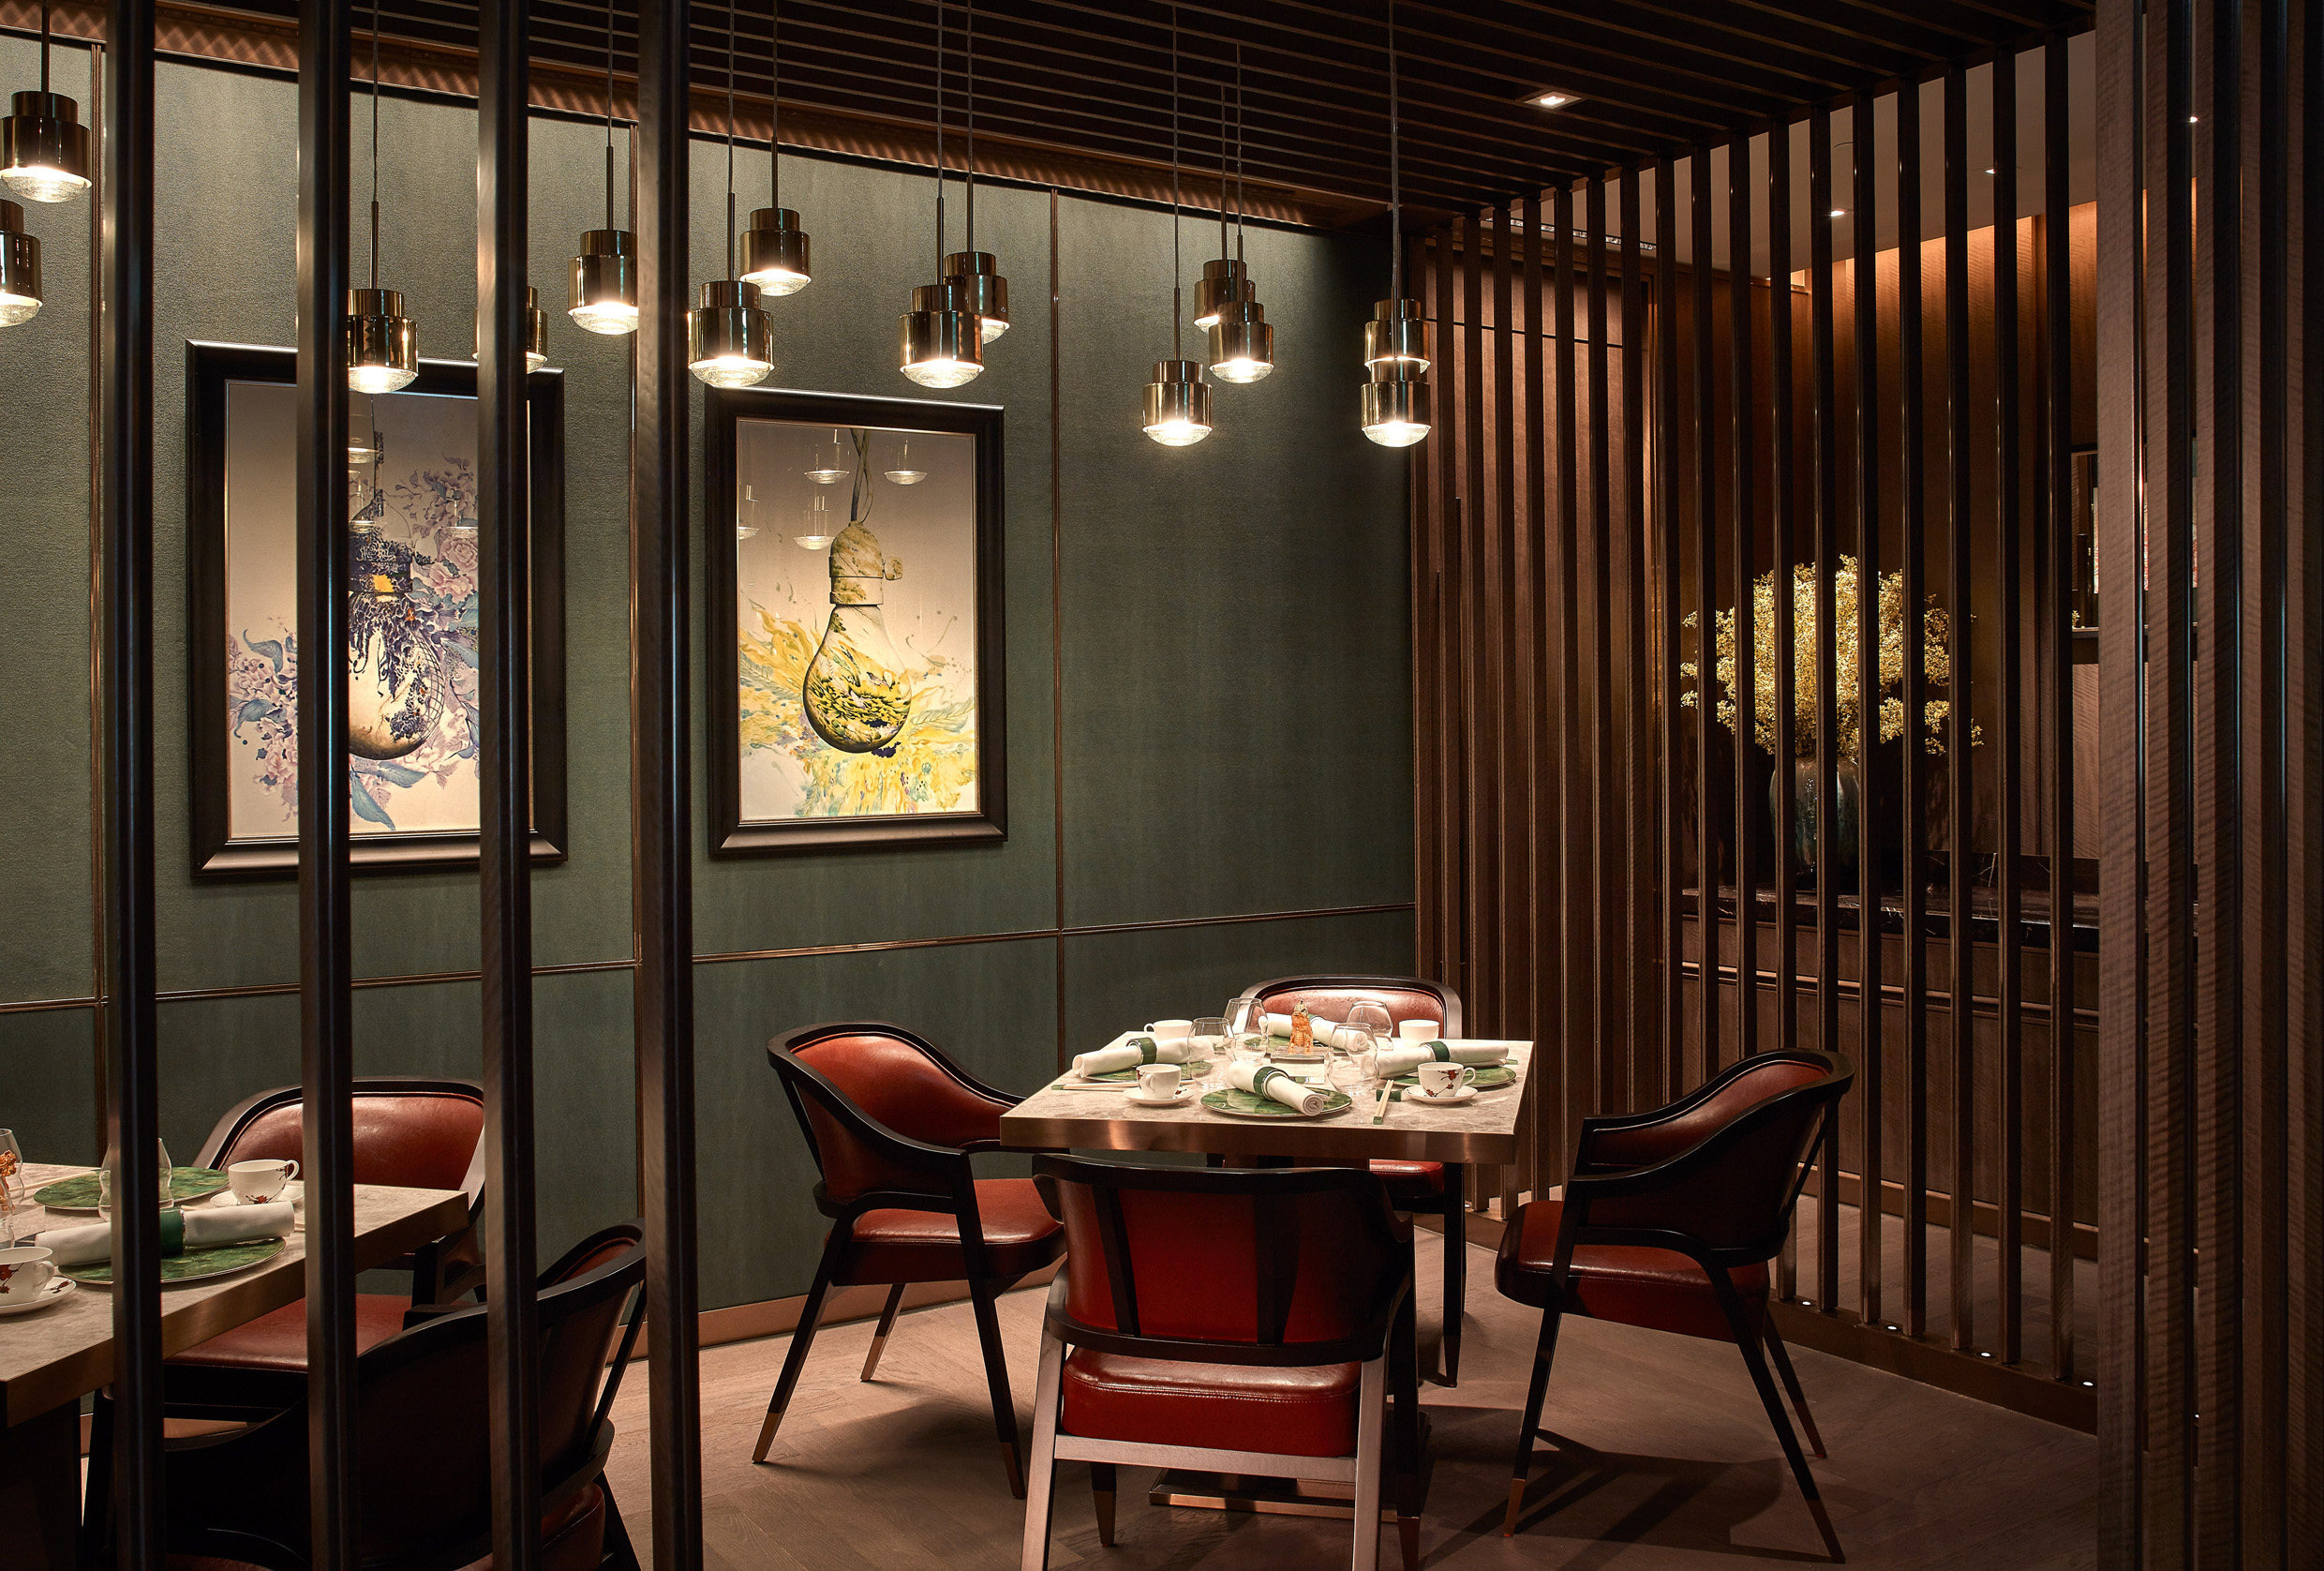 Ying Jee Club’s opulent interior. Photo: ZS Hospitality